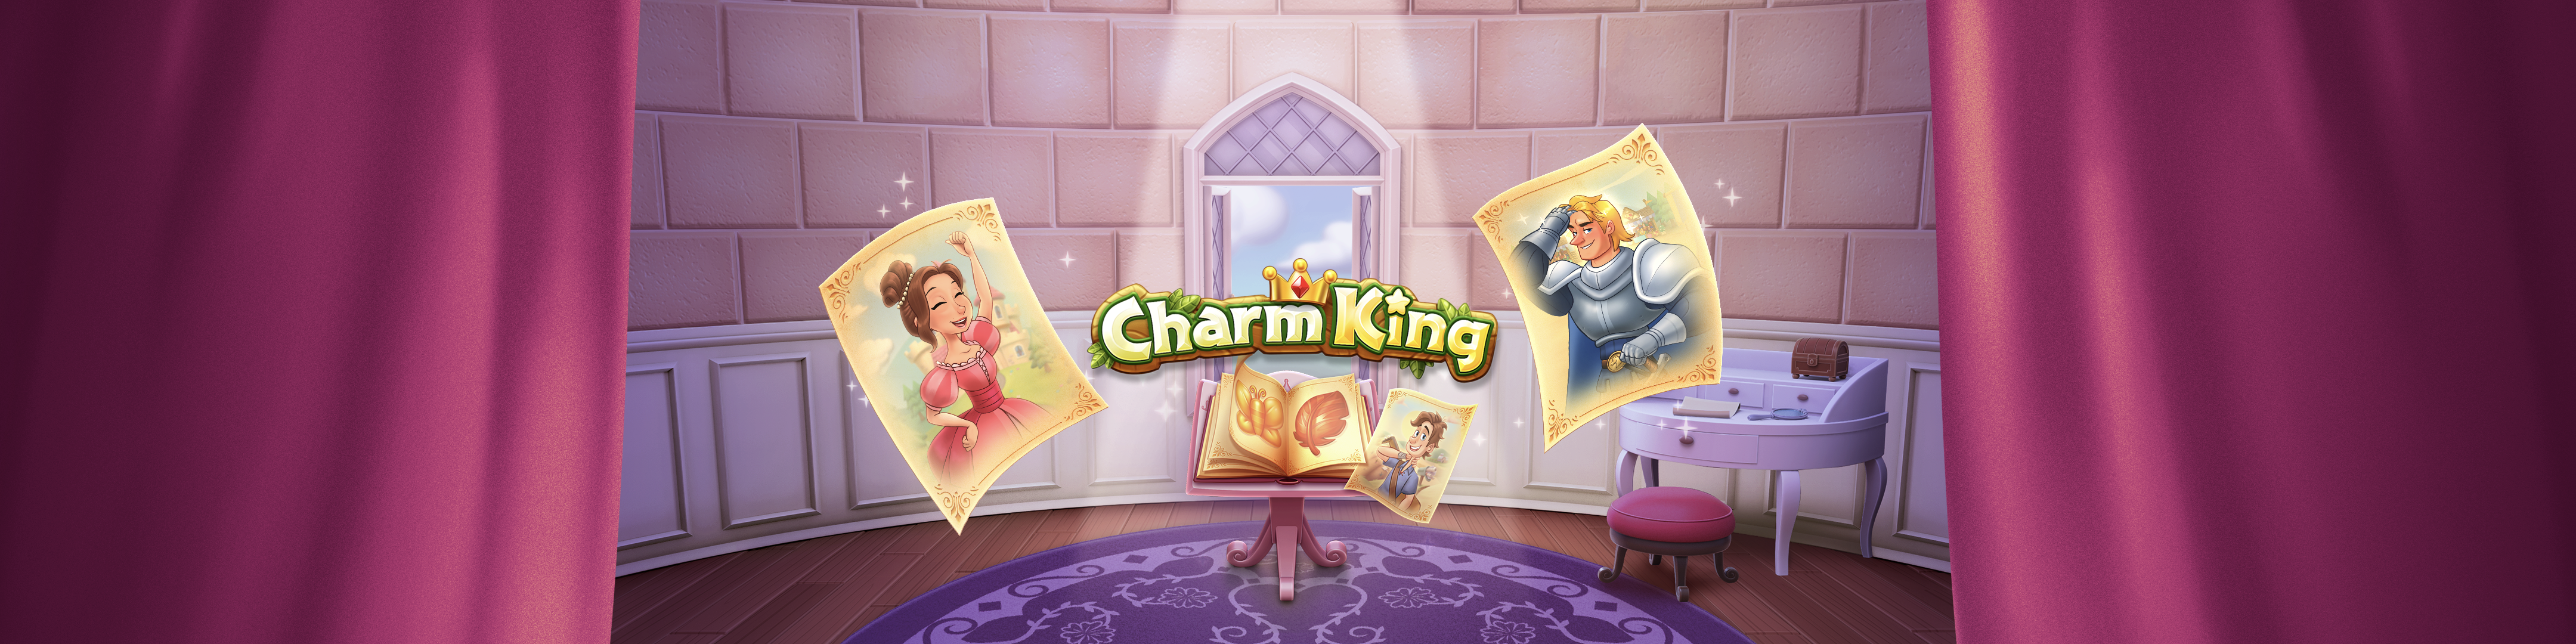 Charm King Overview Apple App Store Canada - videos matching furniture house tour glitch roblox